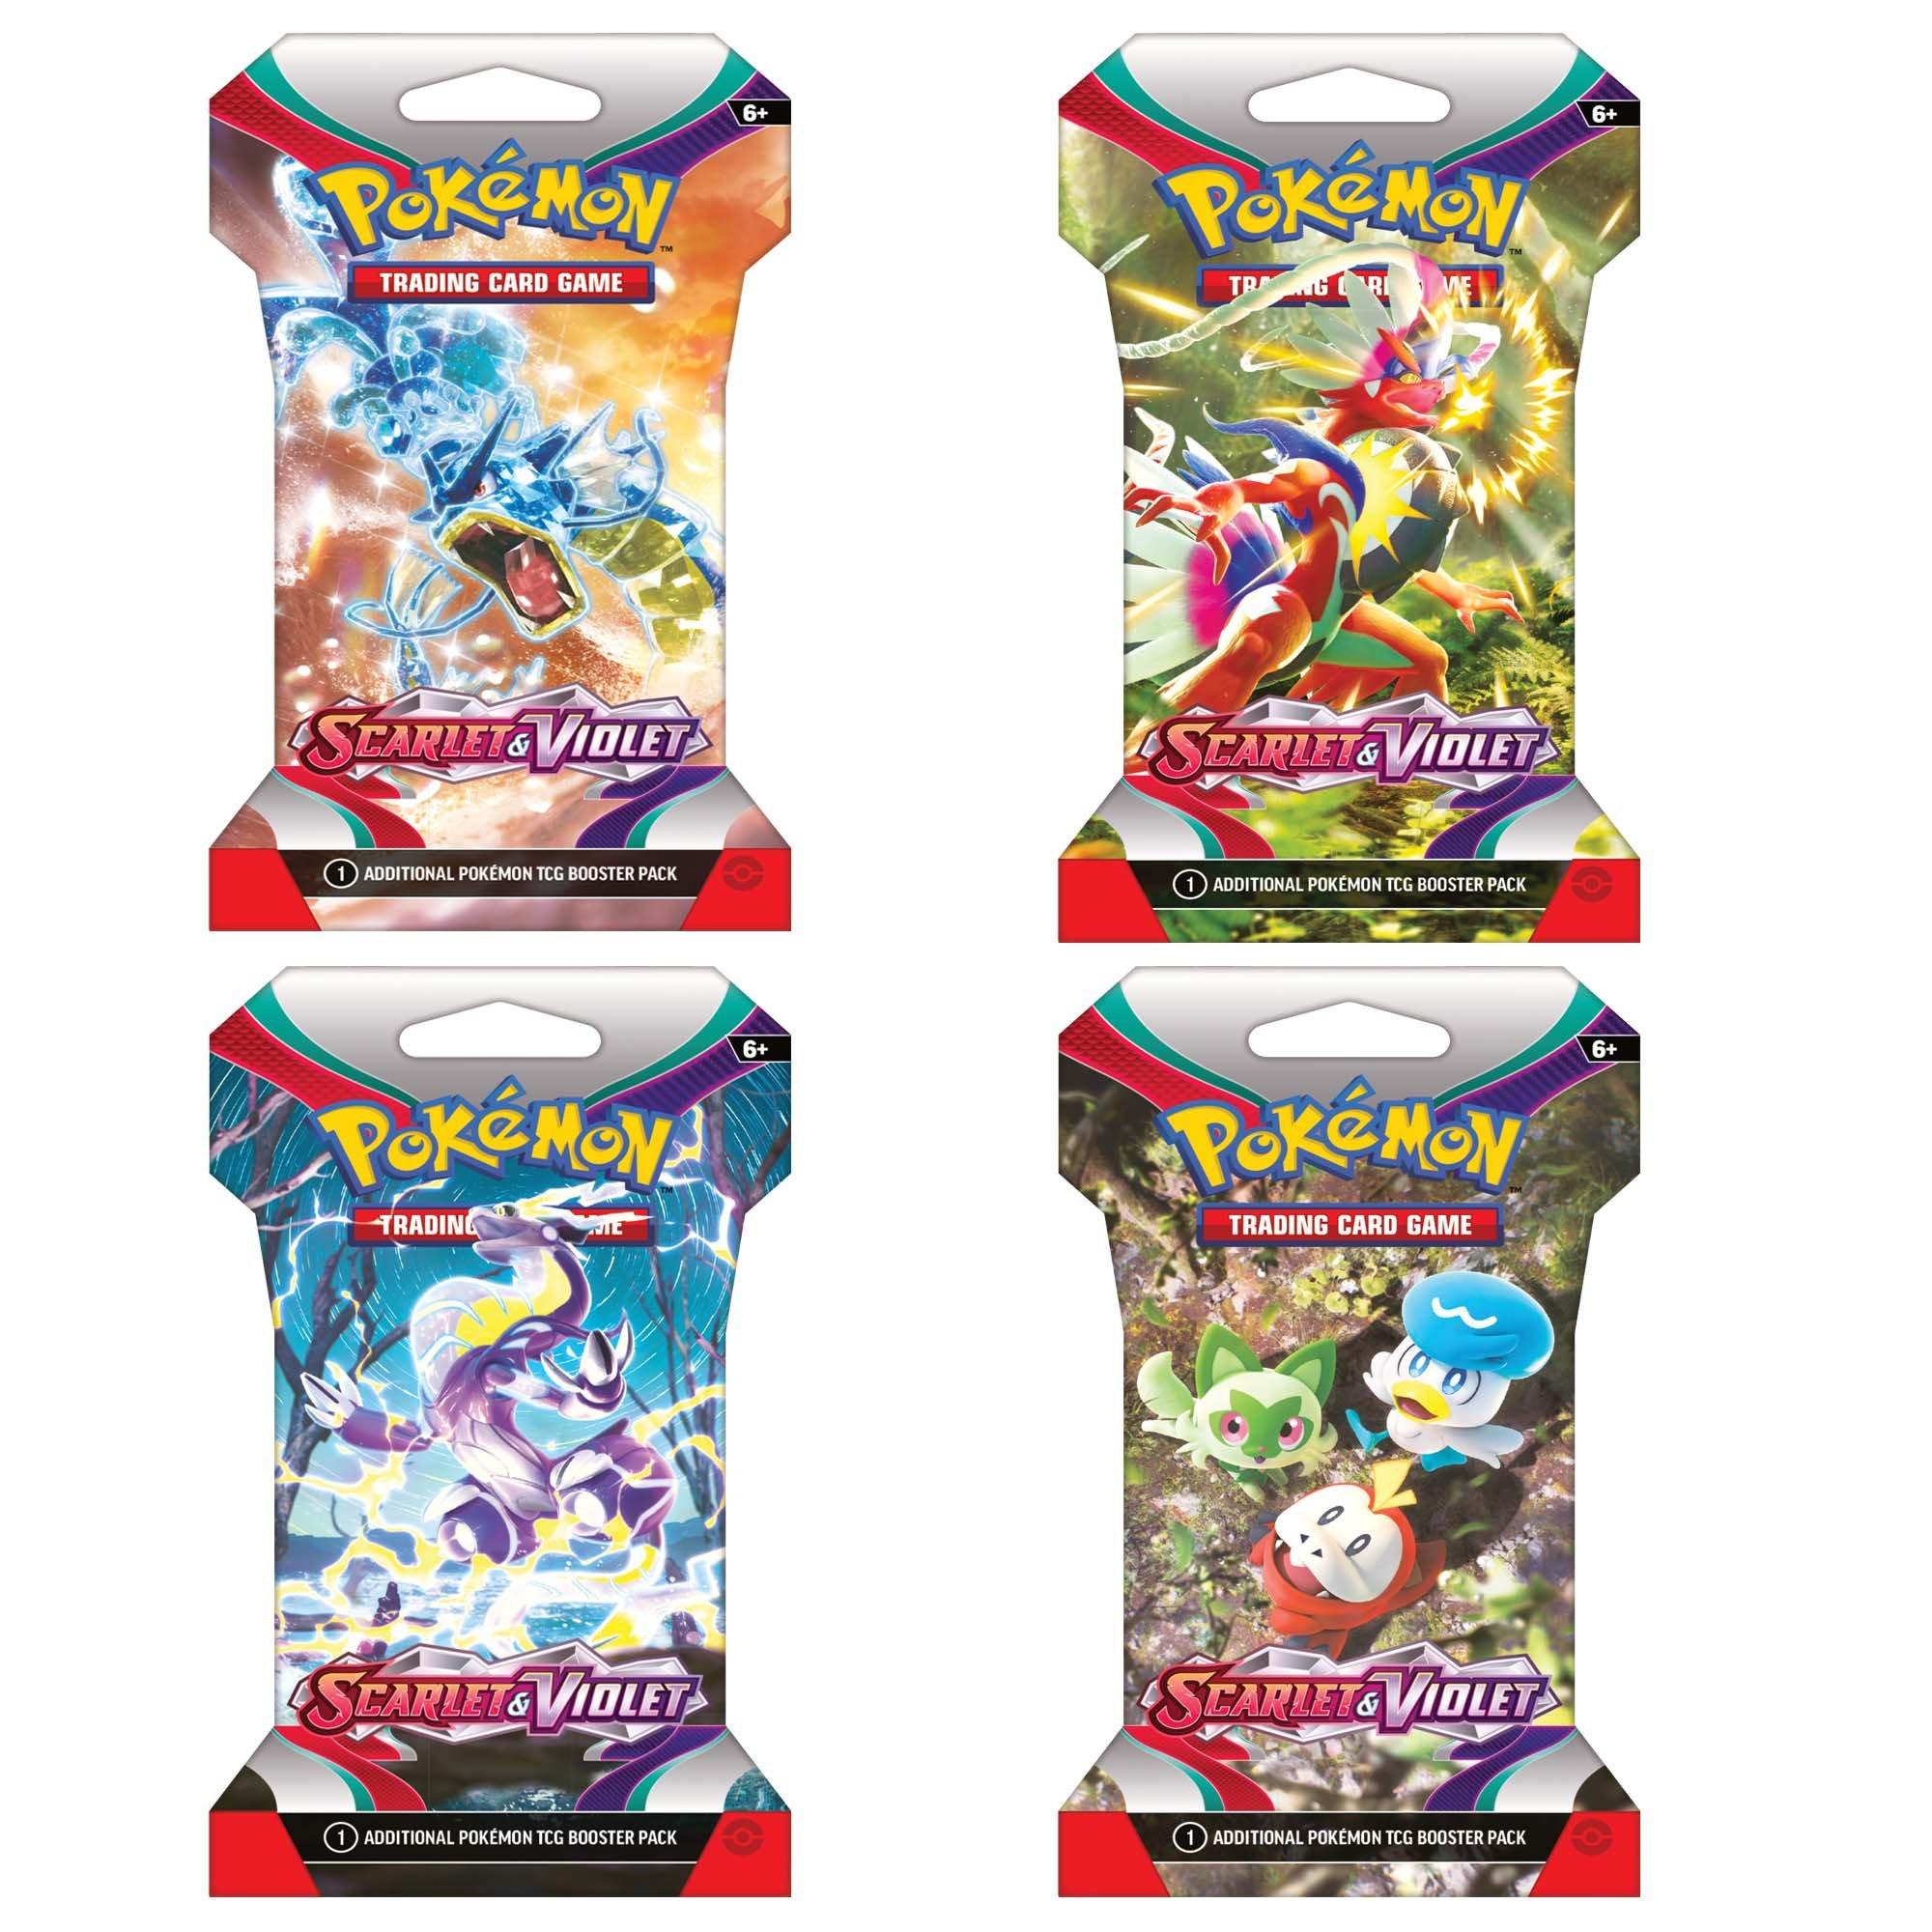 https://media.gamestop.com/i/gamestop/20002522/Pokemon-Trading-Card-Game-Scarlet-and-Violet-Sleeved-Booster-Pack-Styles-May-Vary